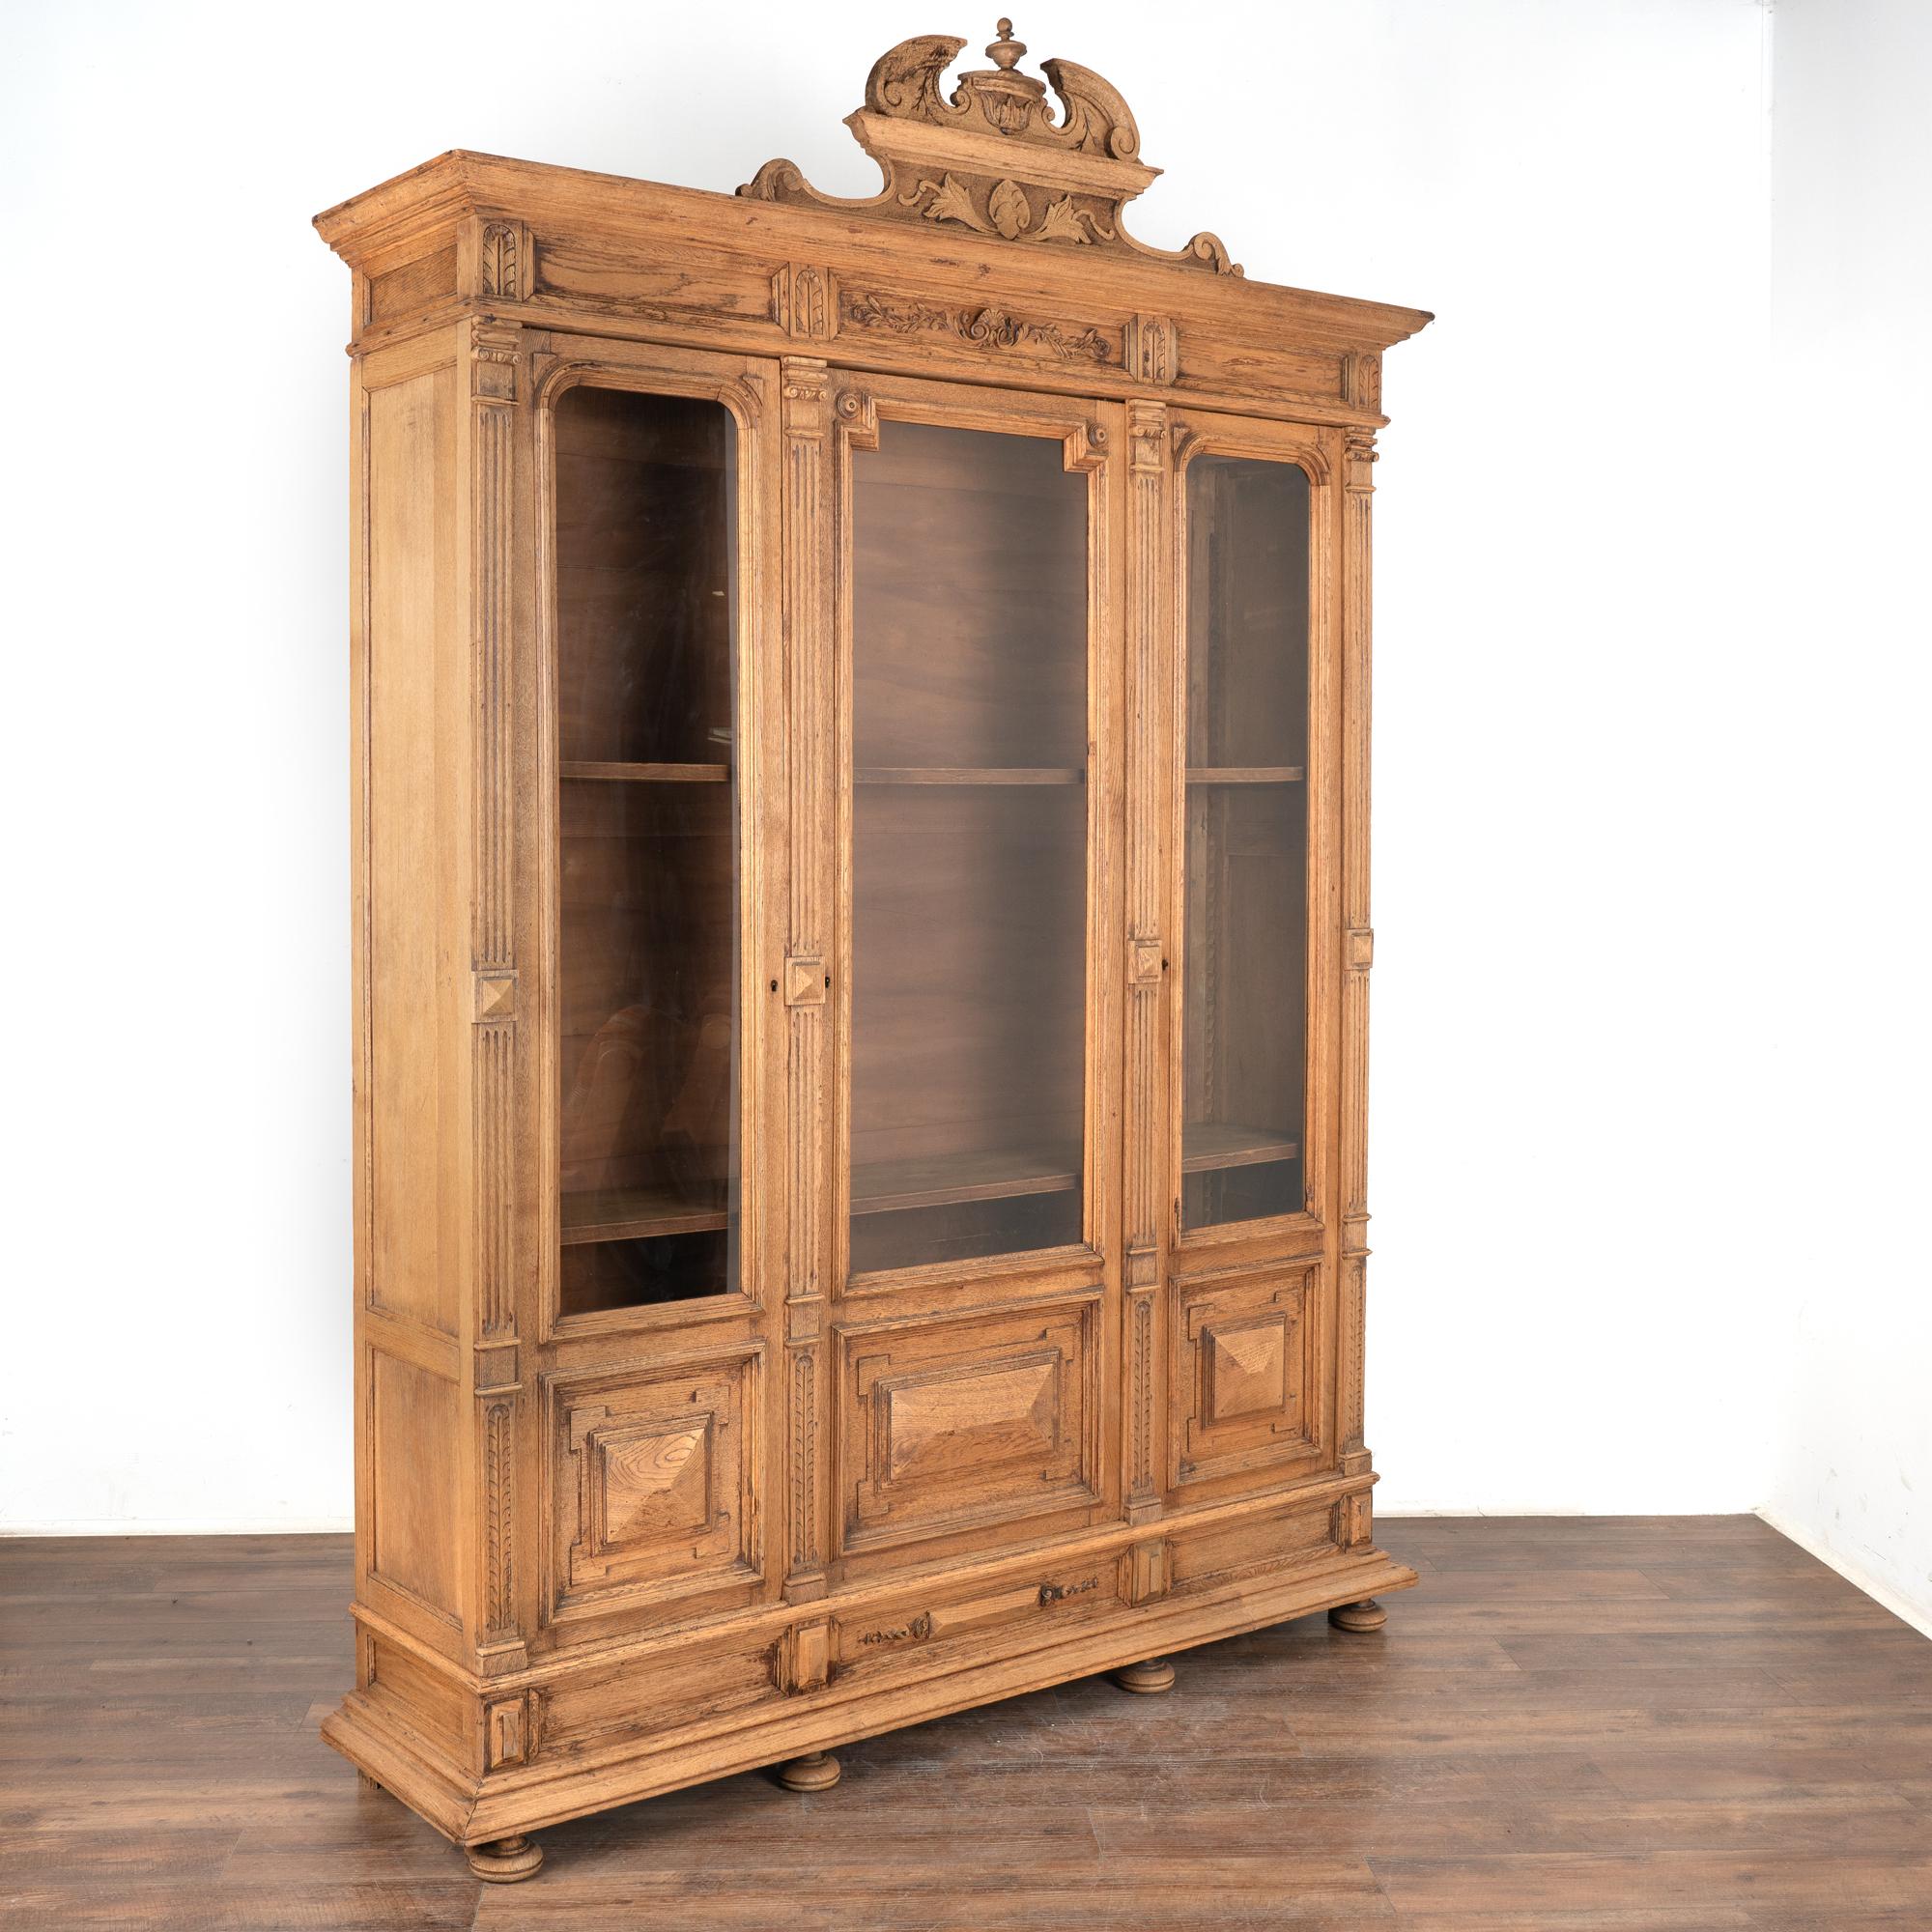 French Bleached Oak Display Cabinet Bookcase With Adjustable Shelves France circa 1900s